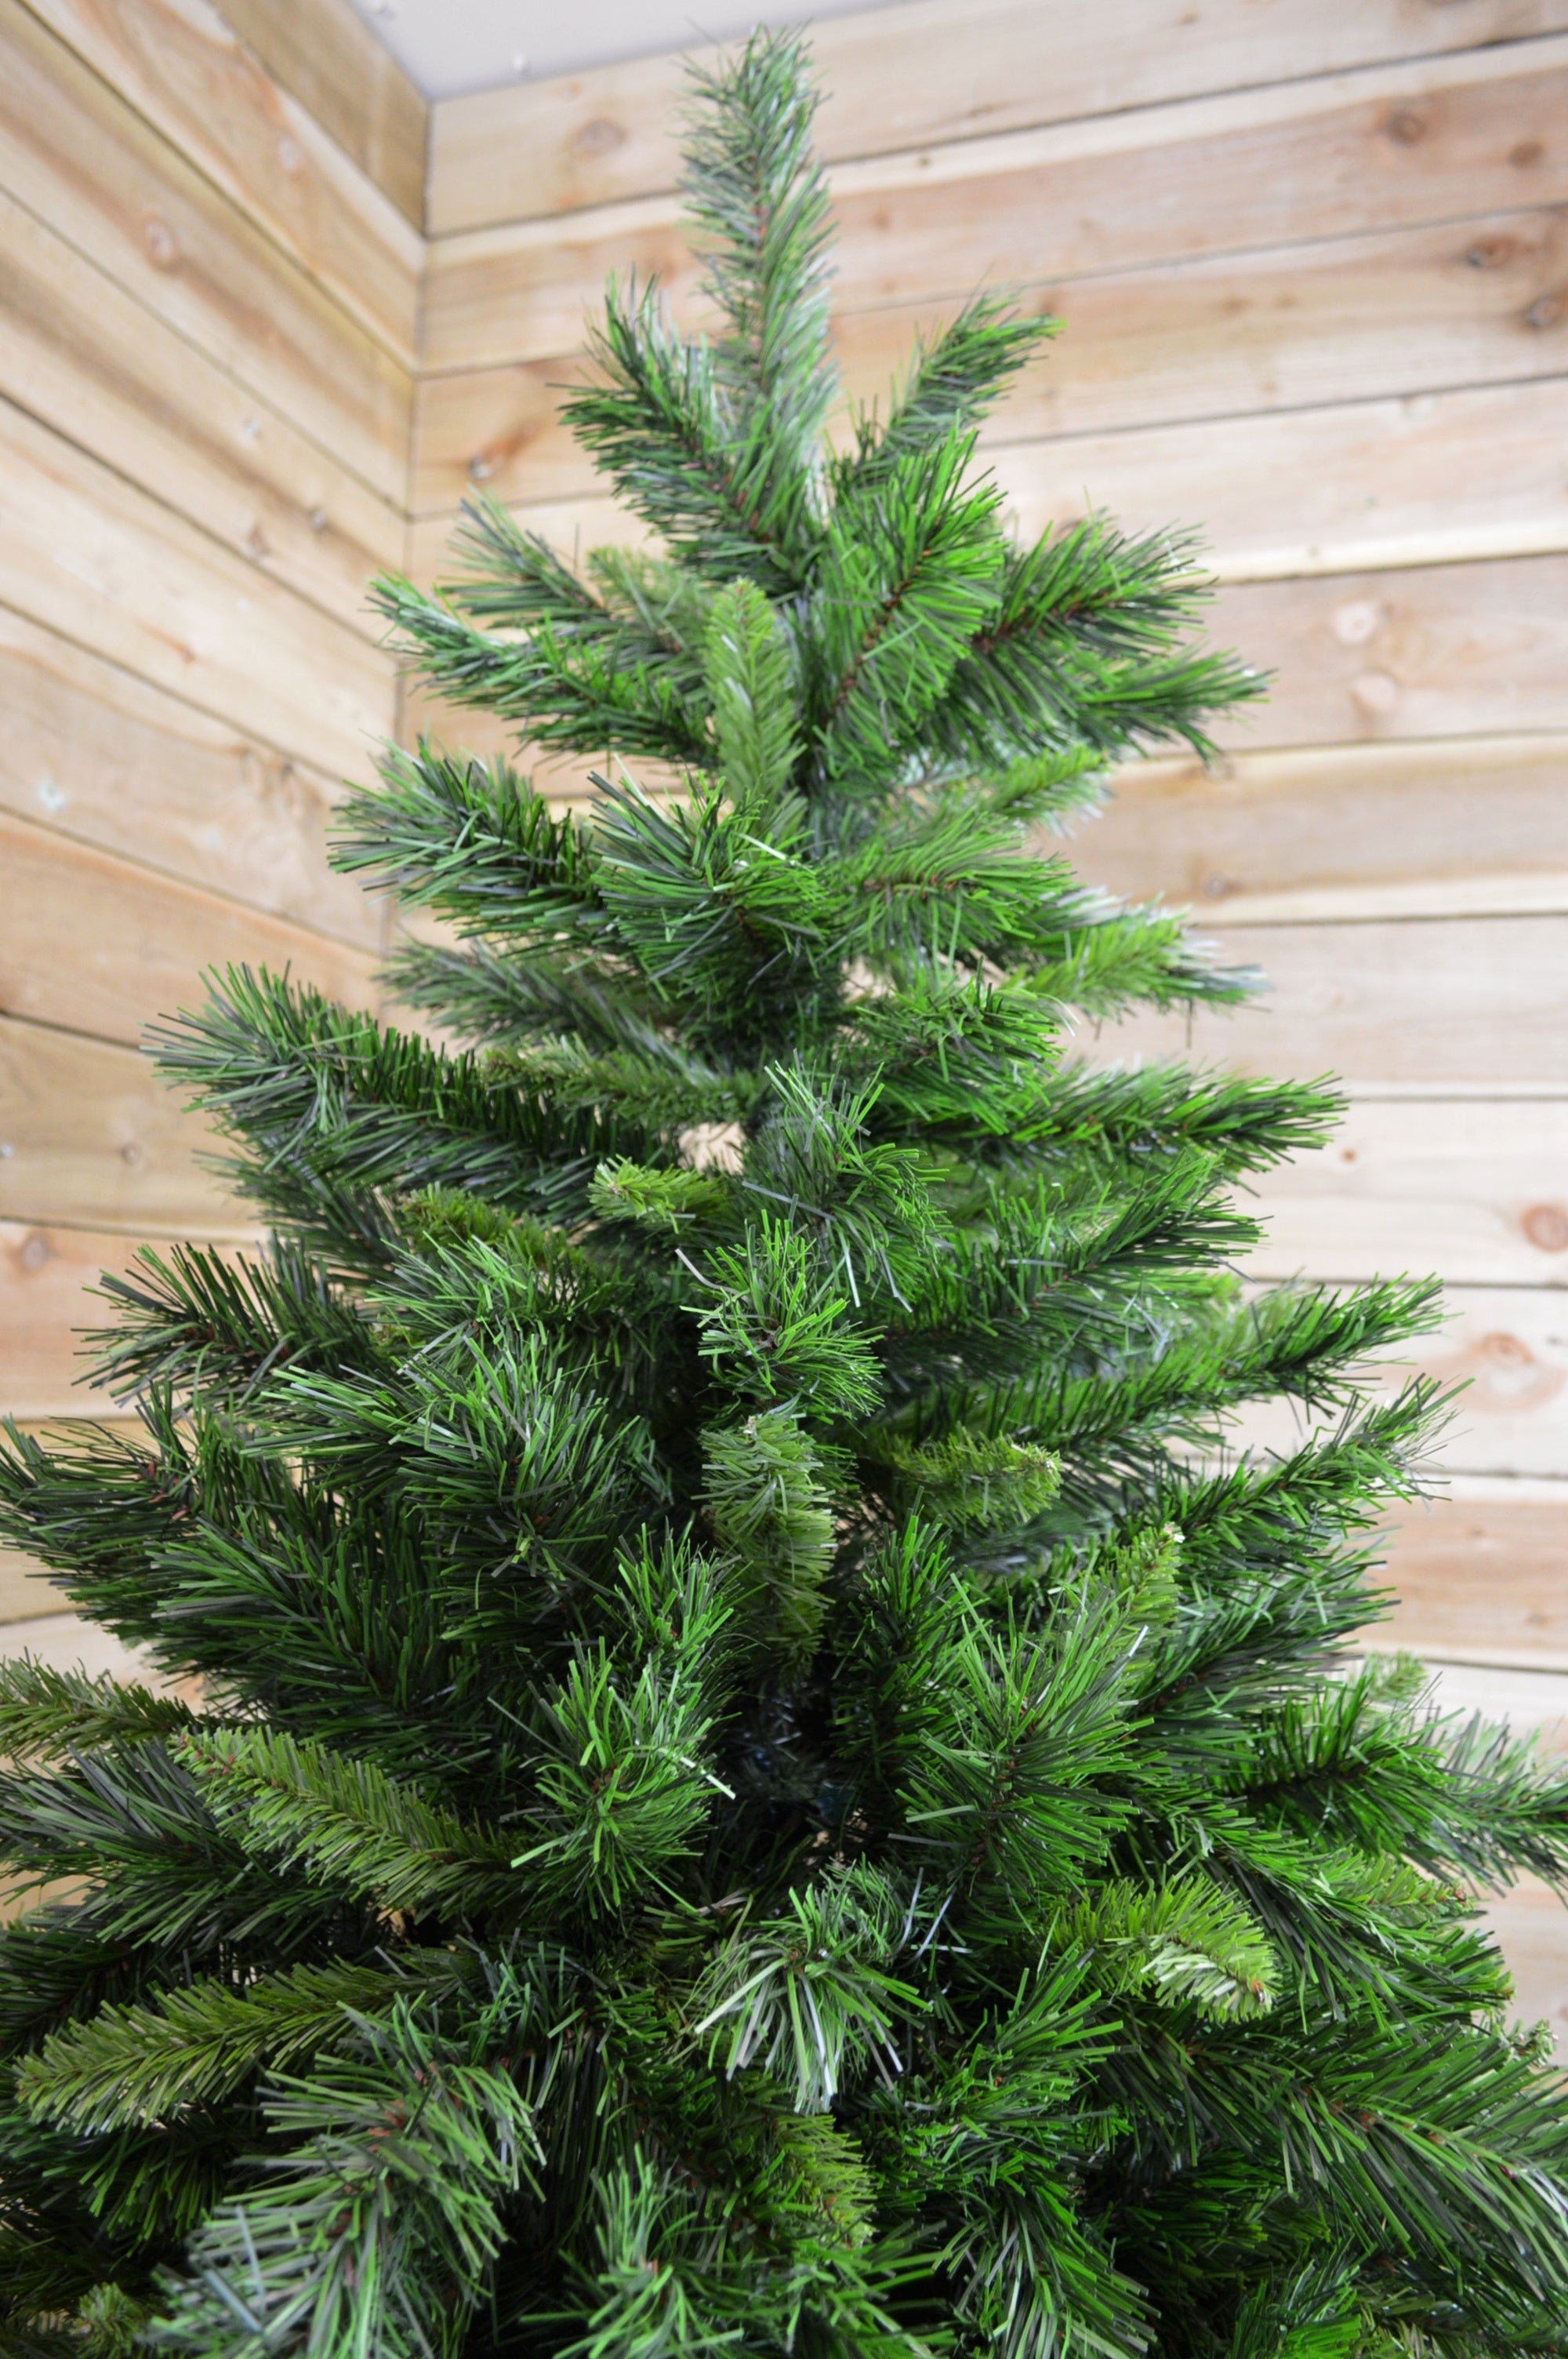 6ft, 7ft or 7.5ft Snowtime Luxury Kateson Fir Christmas Tree in Green